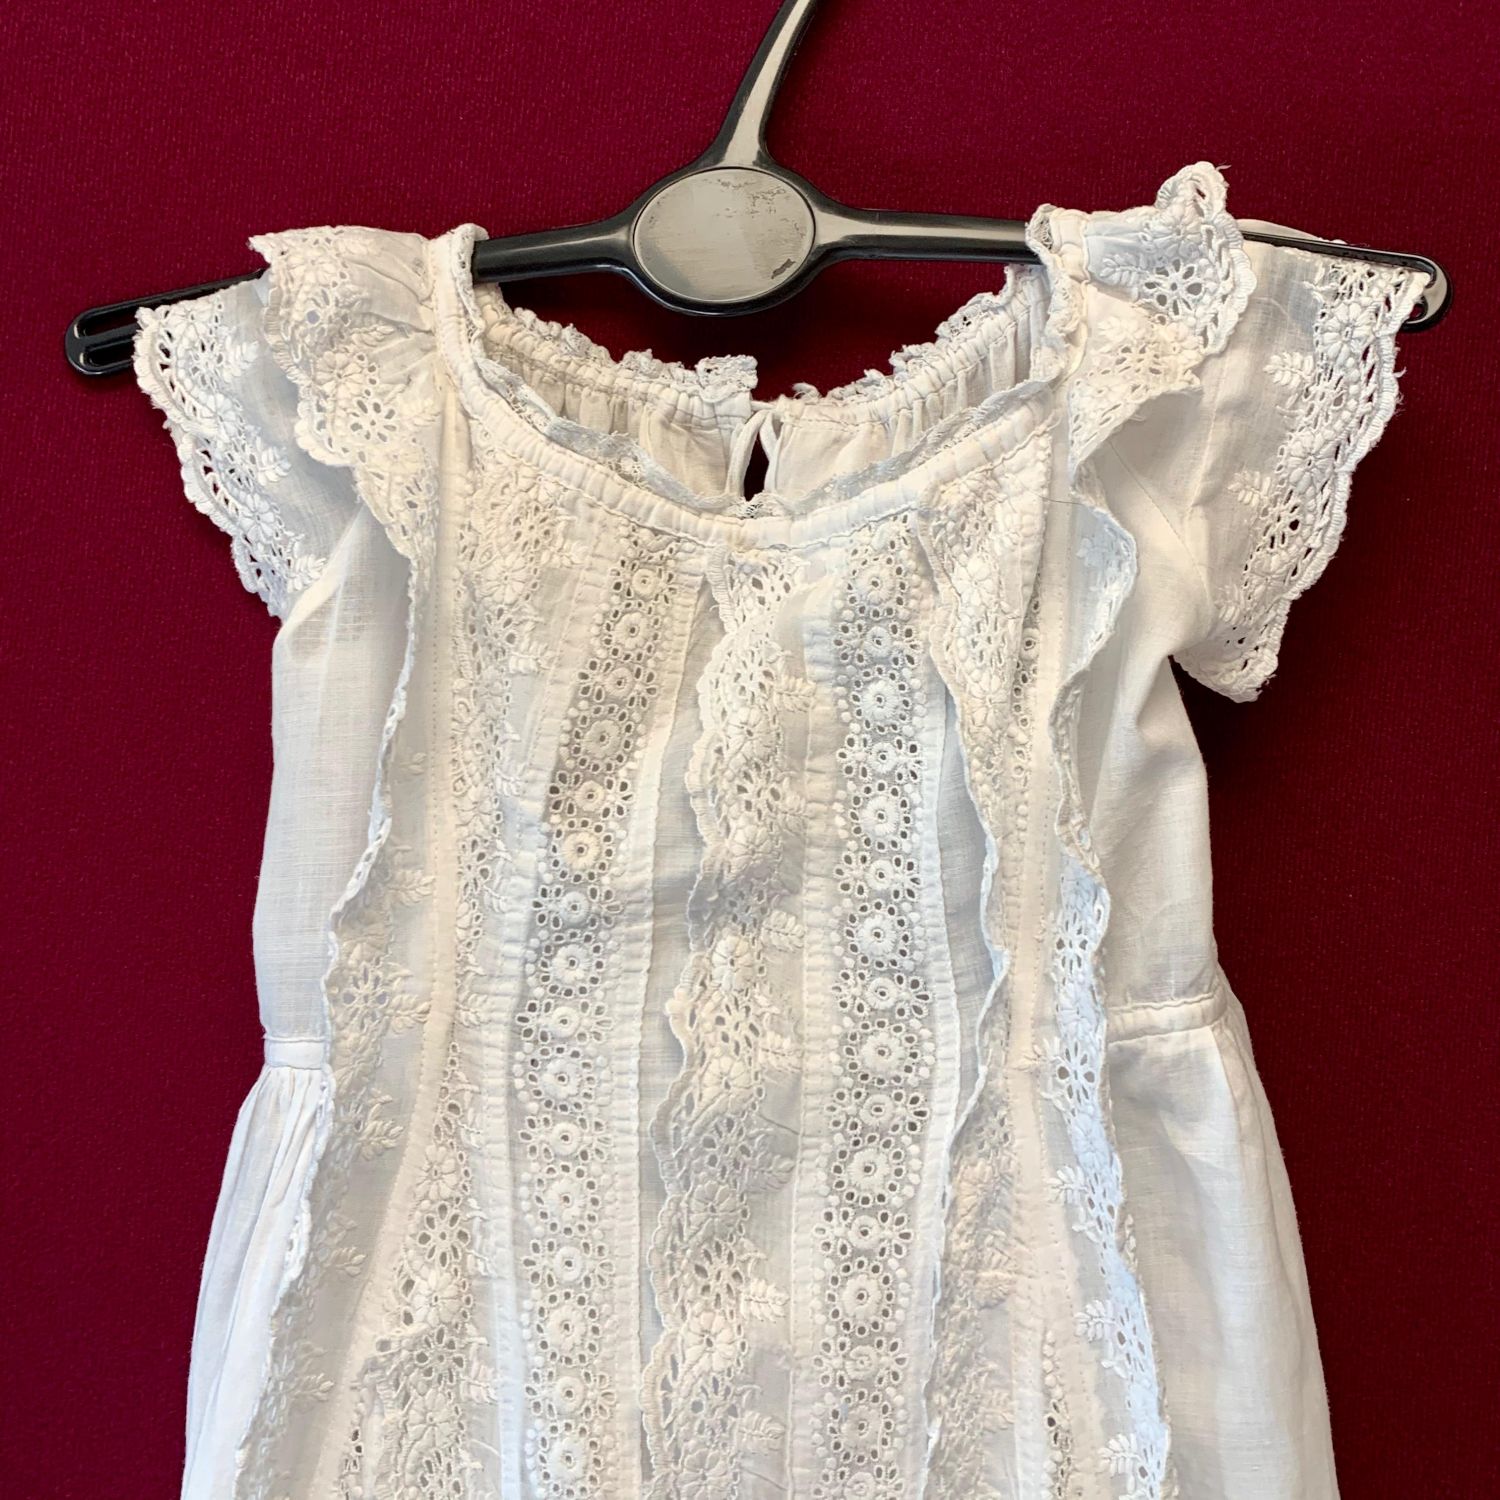 Circa 1900 Broderie Anglaise Christening Gown - Vintage Clothes ...